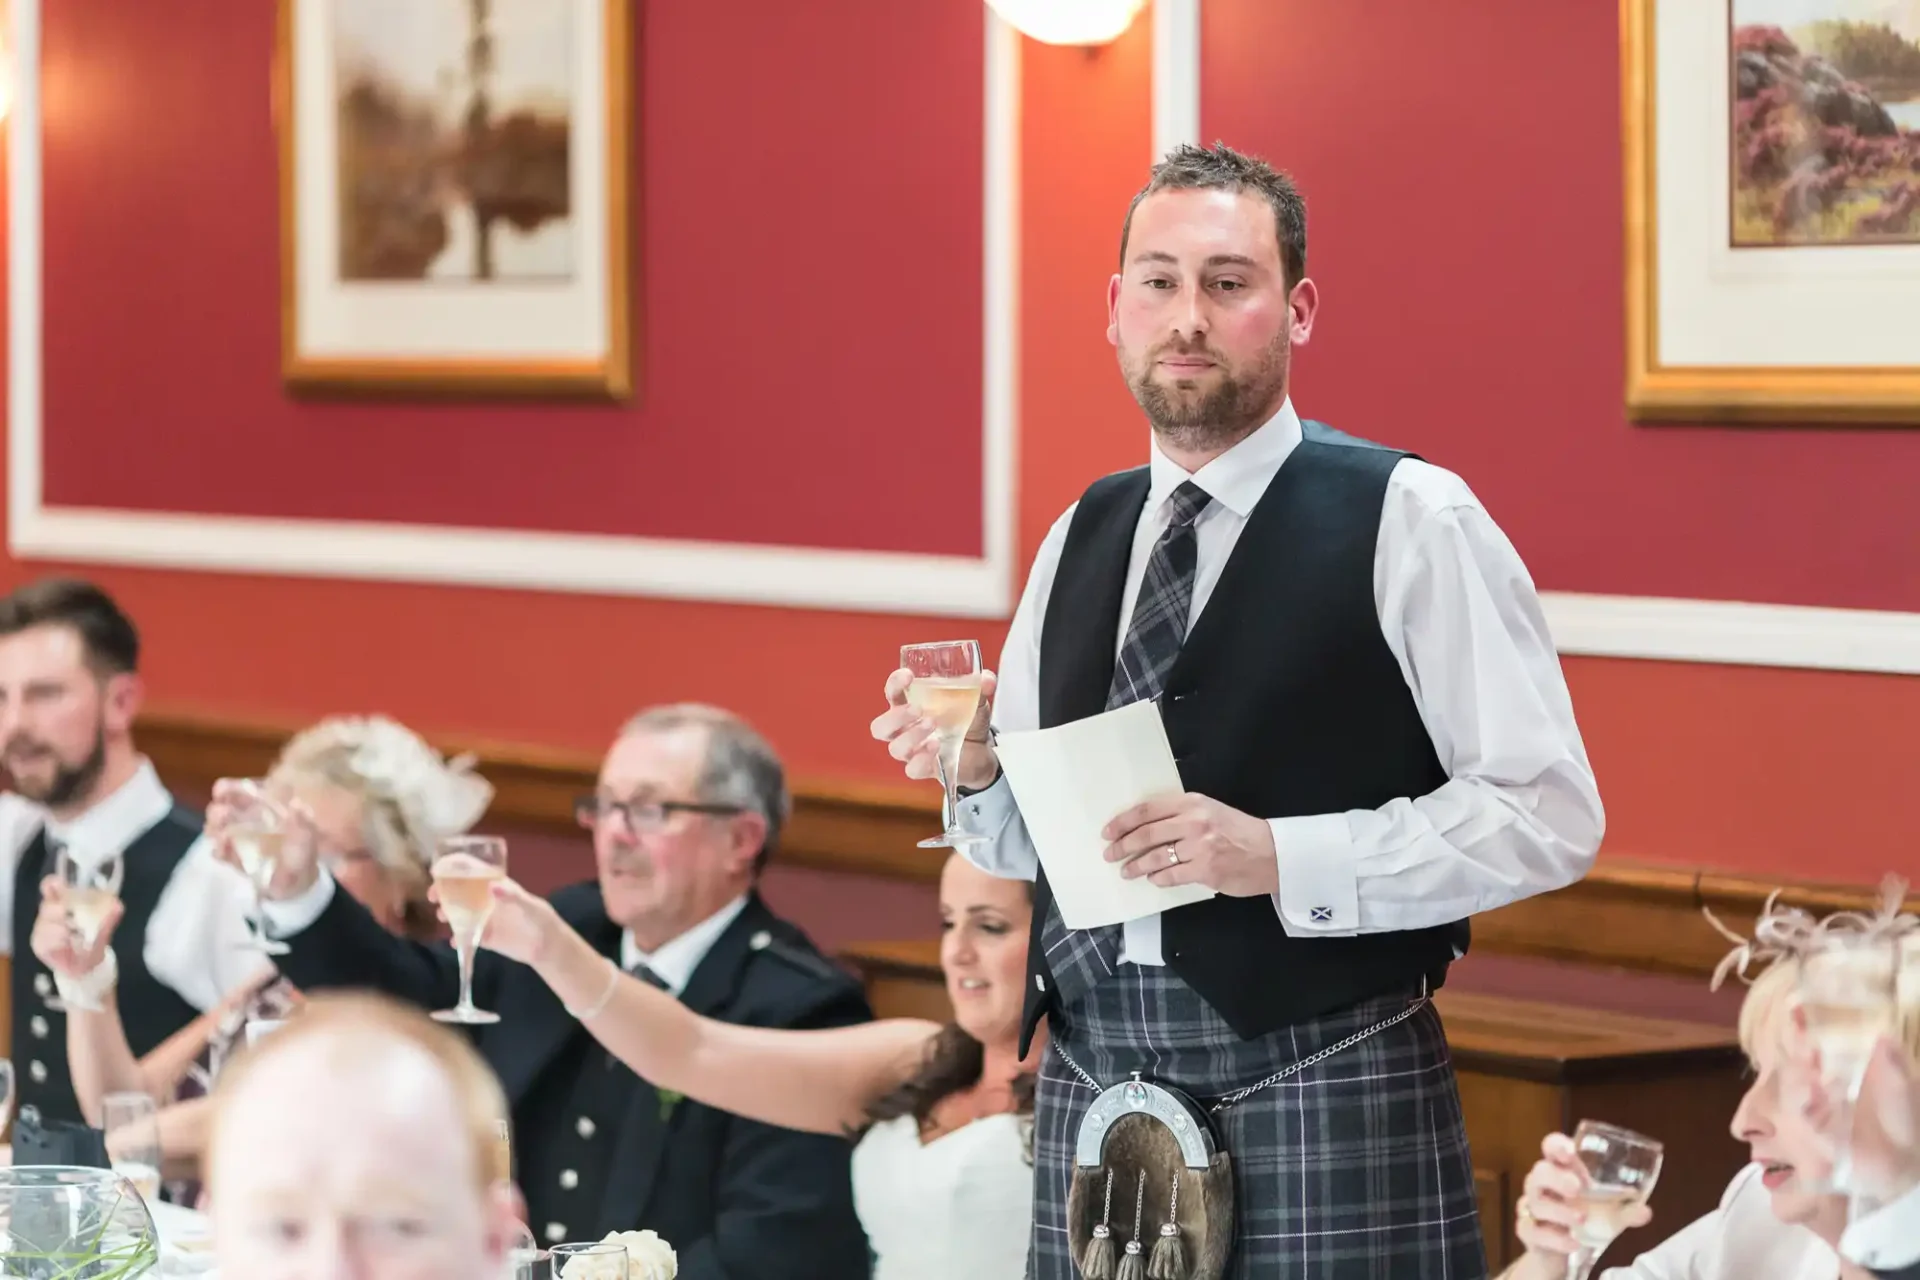 A man in a vest and kilt raises a toast at a wedding reception, holding a speech note, with guests seated around tables.